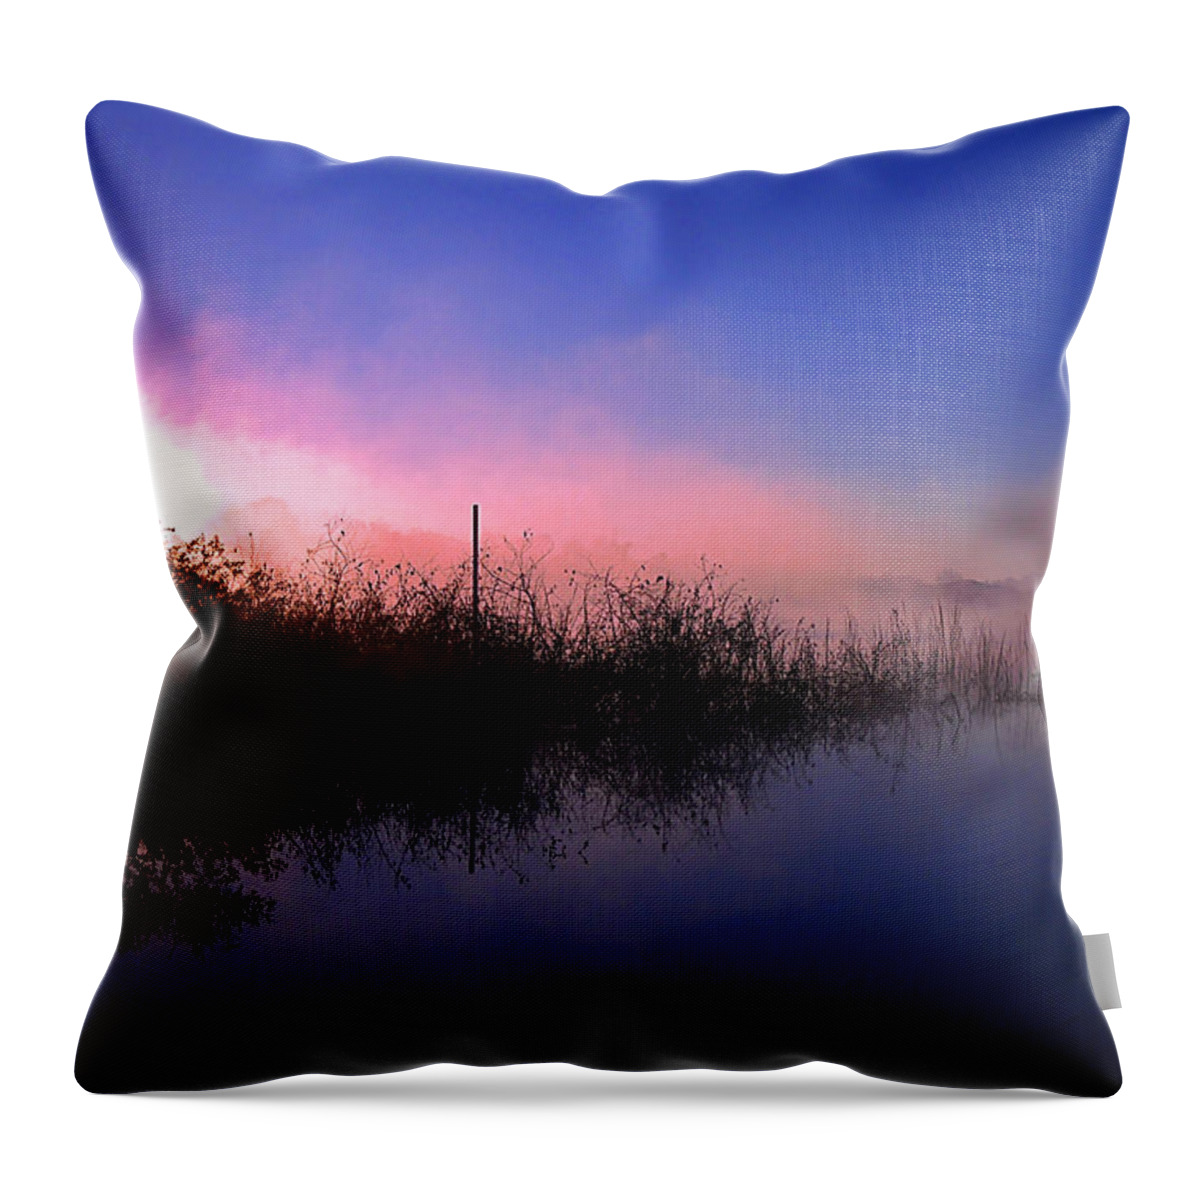 Landscape Throw Pillow featuring the photograph Foggy Lake Sears 000 by Christopher Mercer